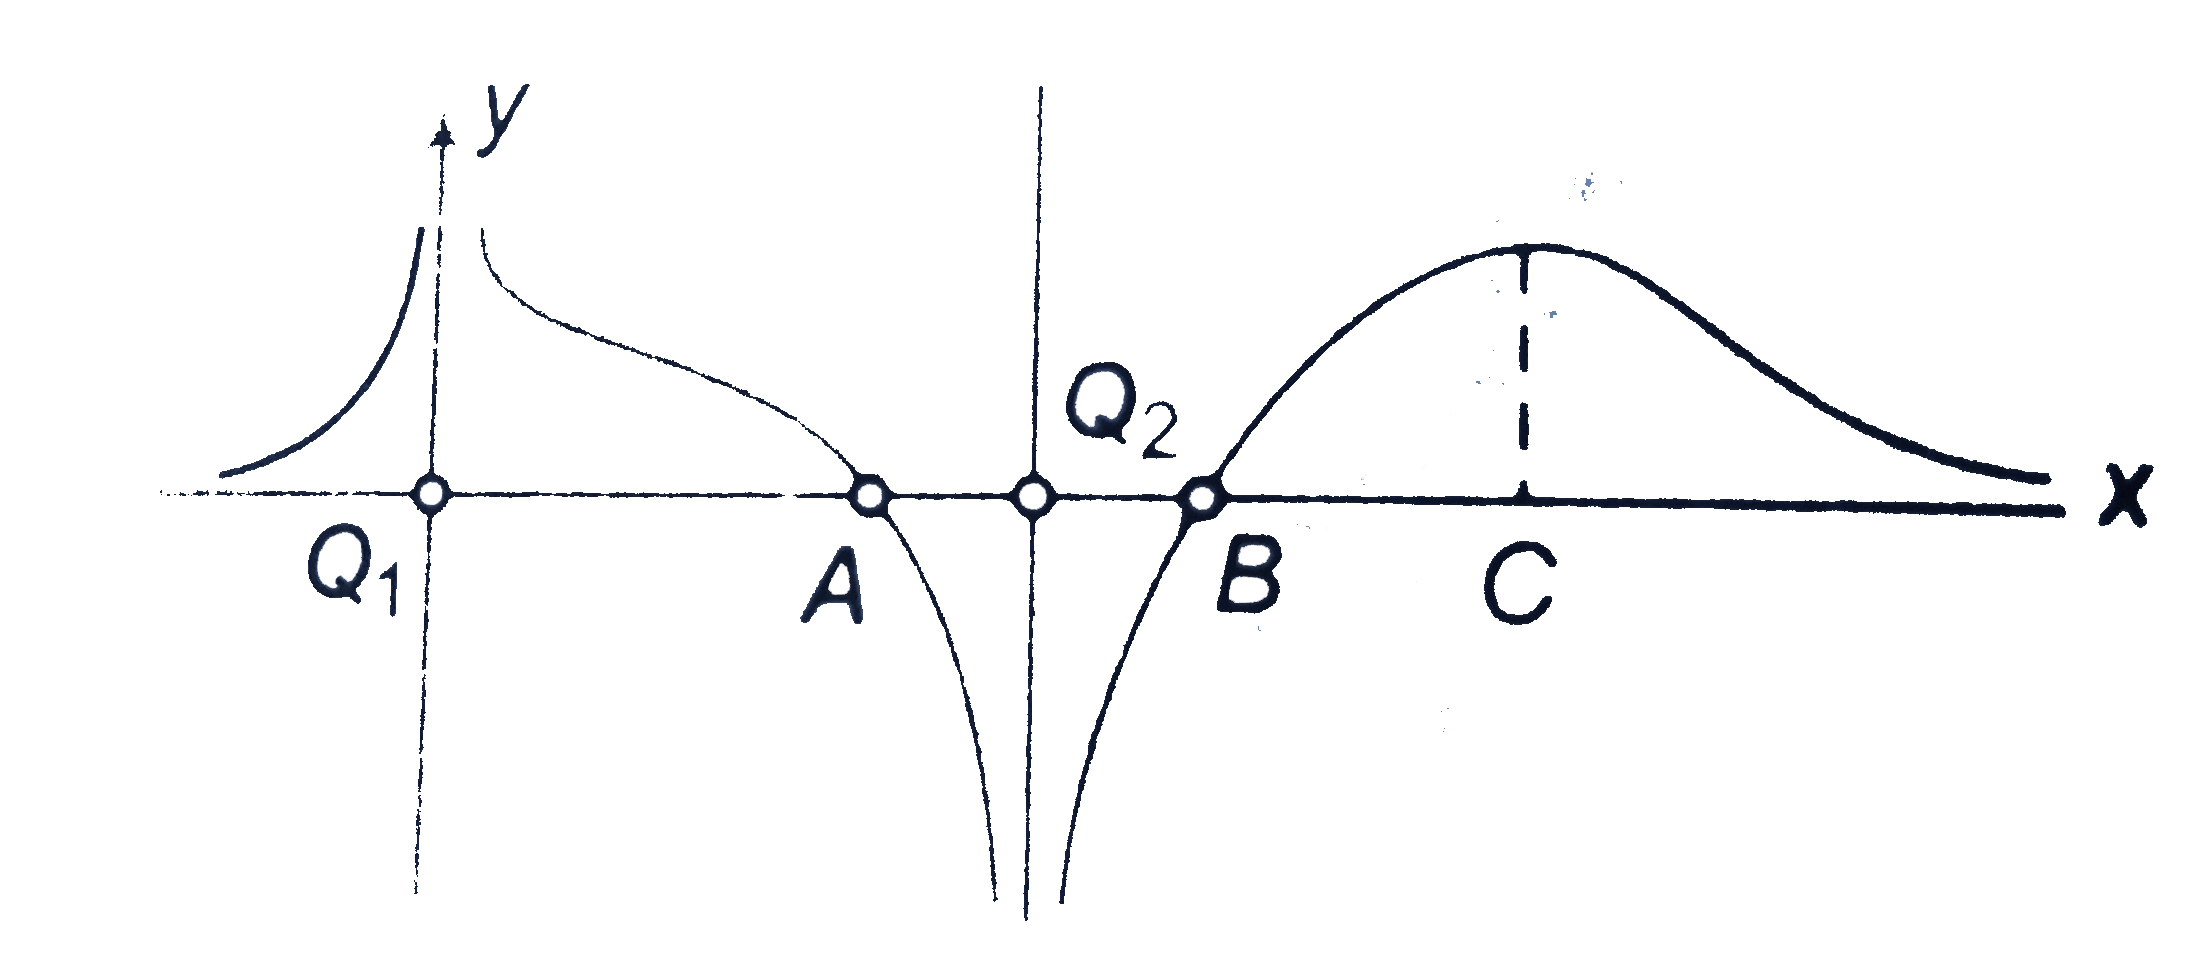 The curve represents the distribution of potential along the straight line joining the two charges Q1 and Q2 (separated by a distance r) then which of the following statements are correct?      1. |Q1|gt|Q2|   2. Q1 is positive in nature   3. A and B are equilibrium points   4. C is a point of unstable equilibrium